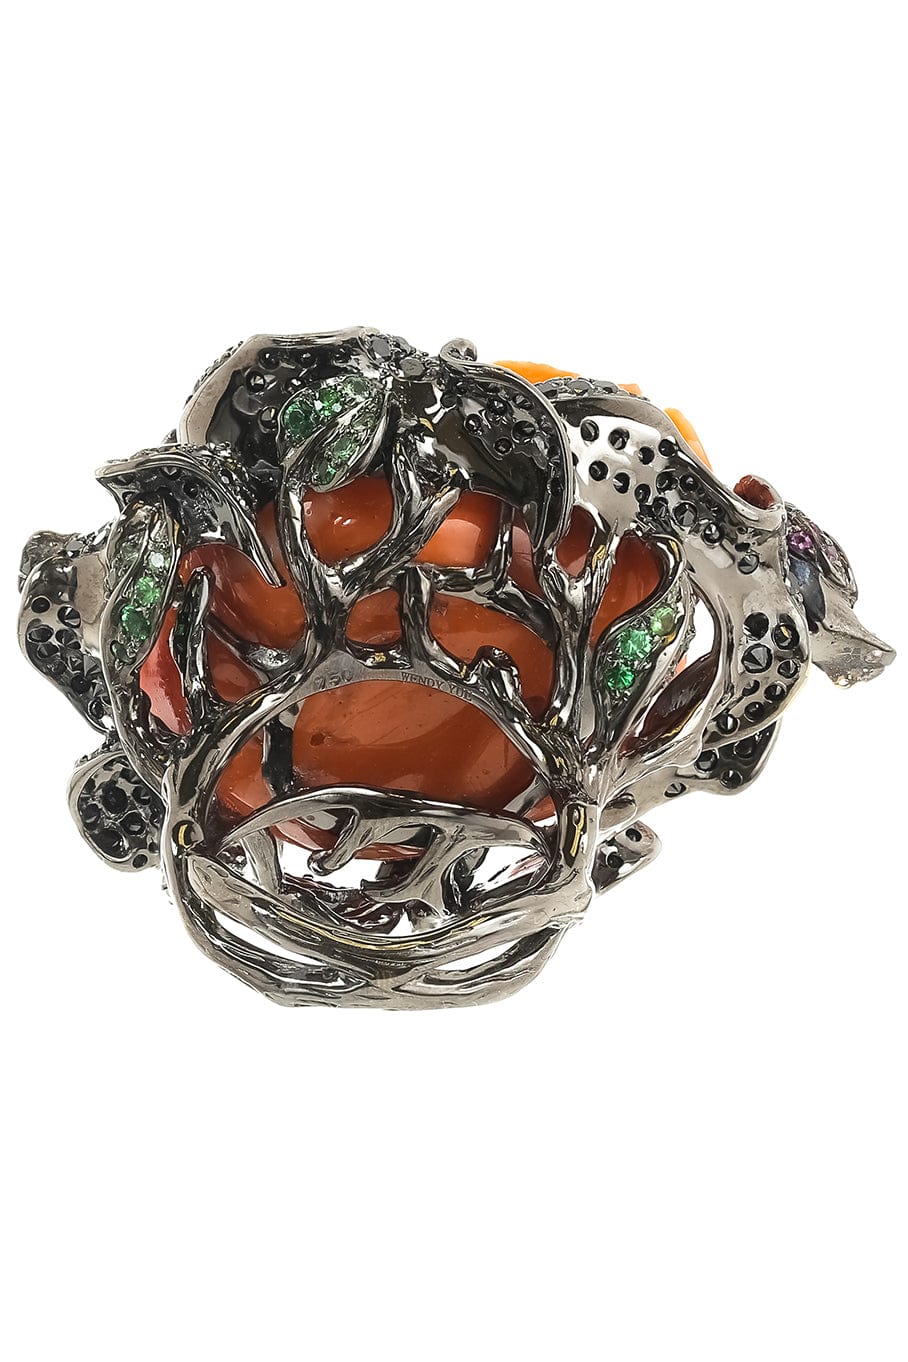 WENDY YUE-Carved Coral Flower Ring-WHITE GOLD